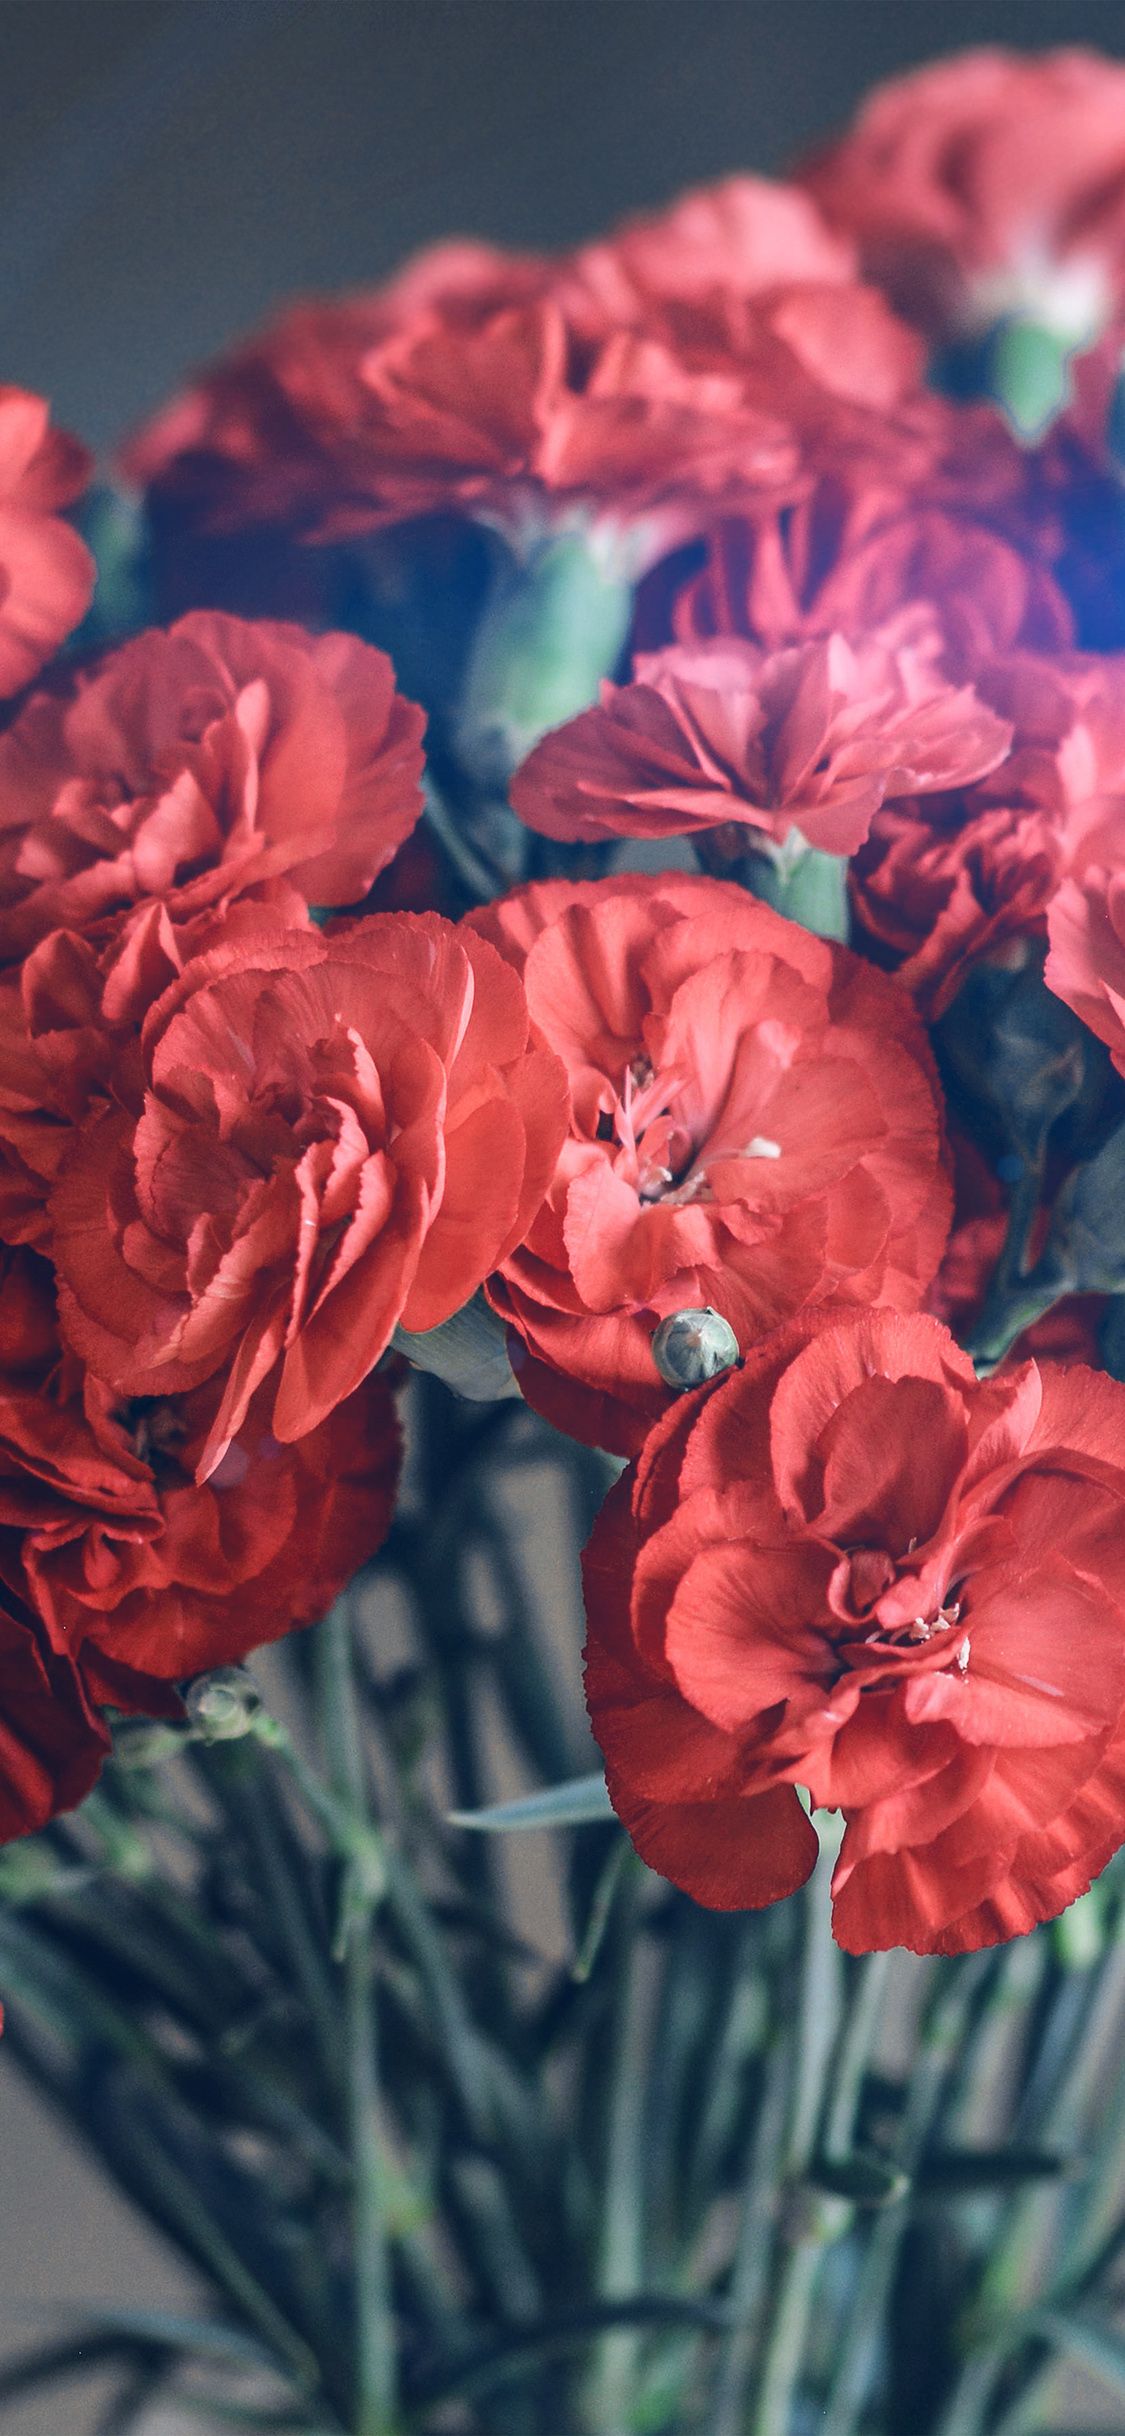 Red carnations in a vase - Spring